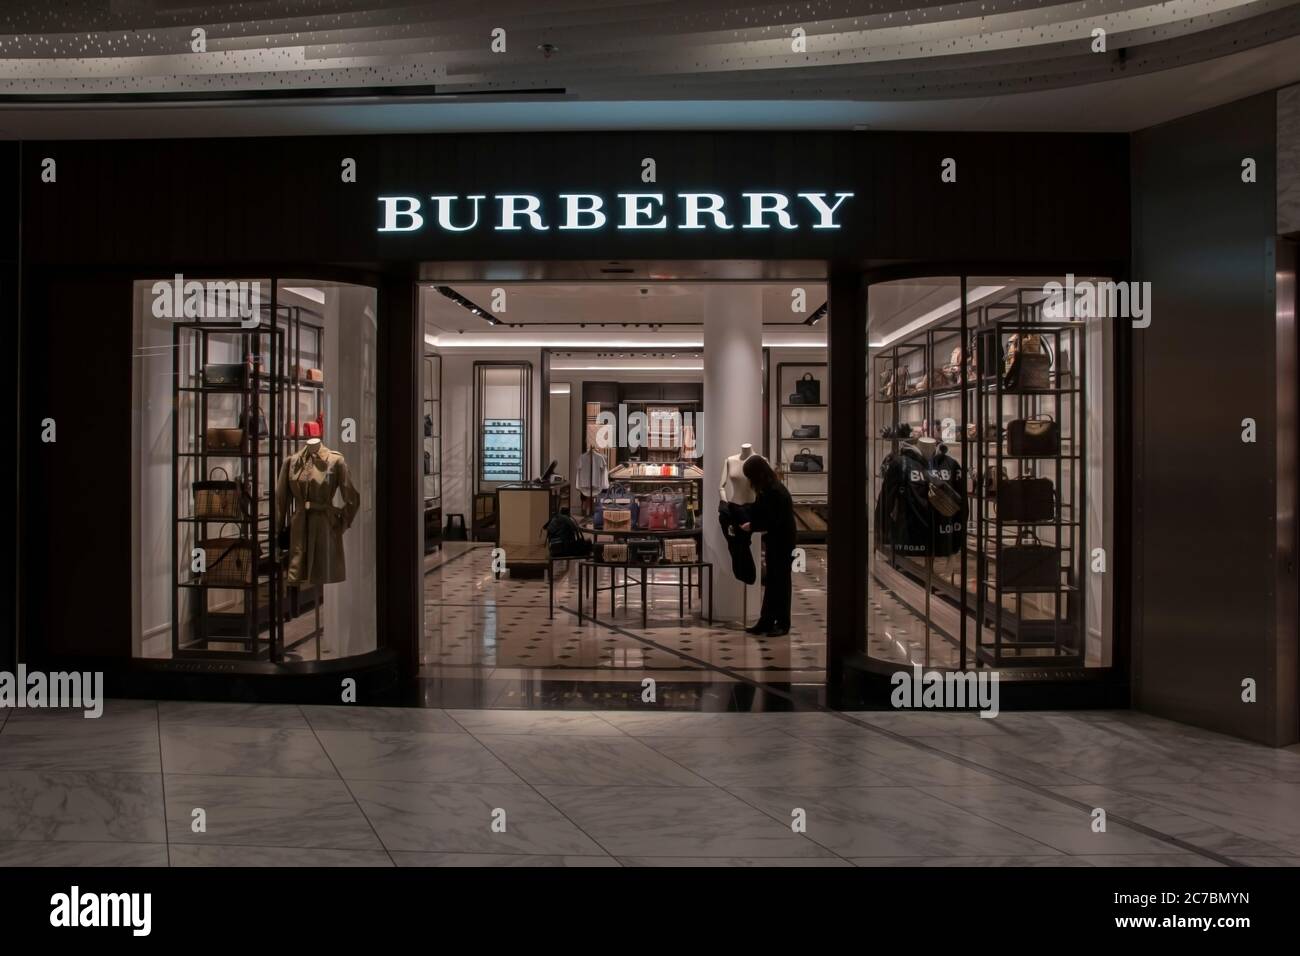 burberry istanbul airport